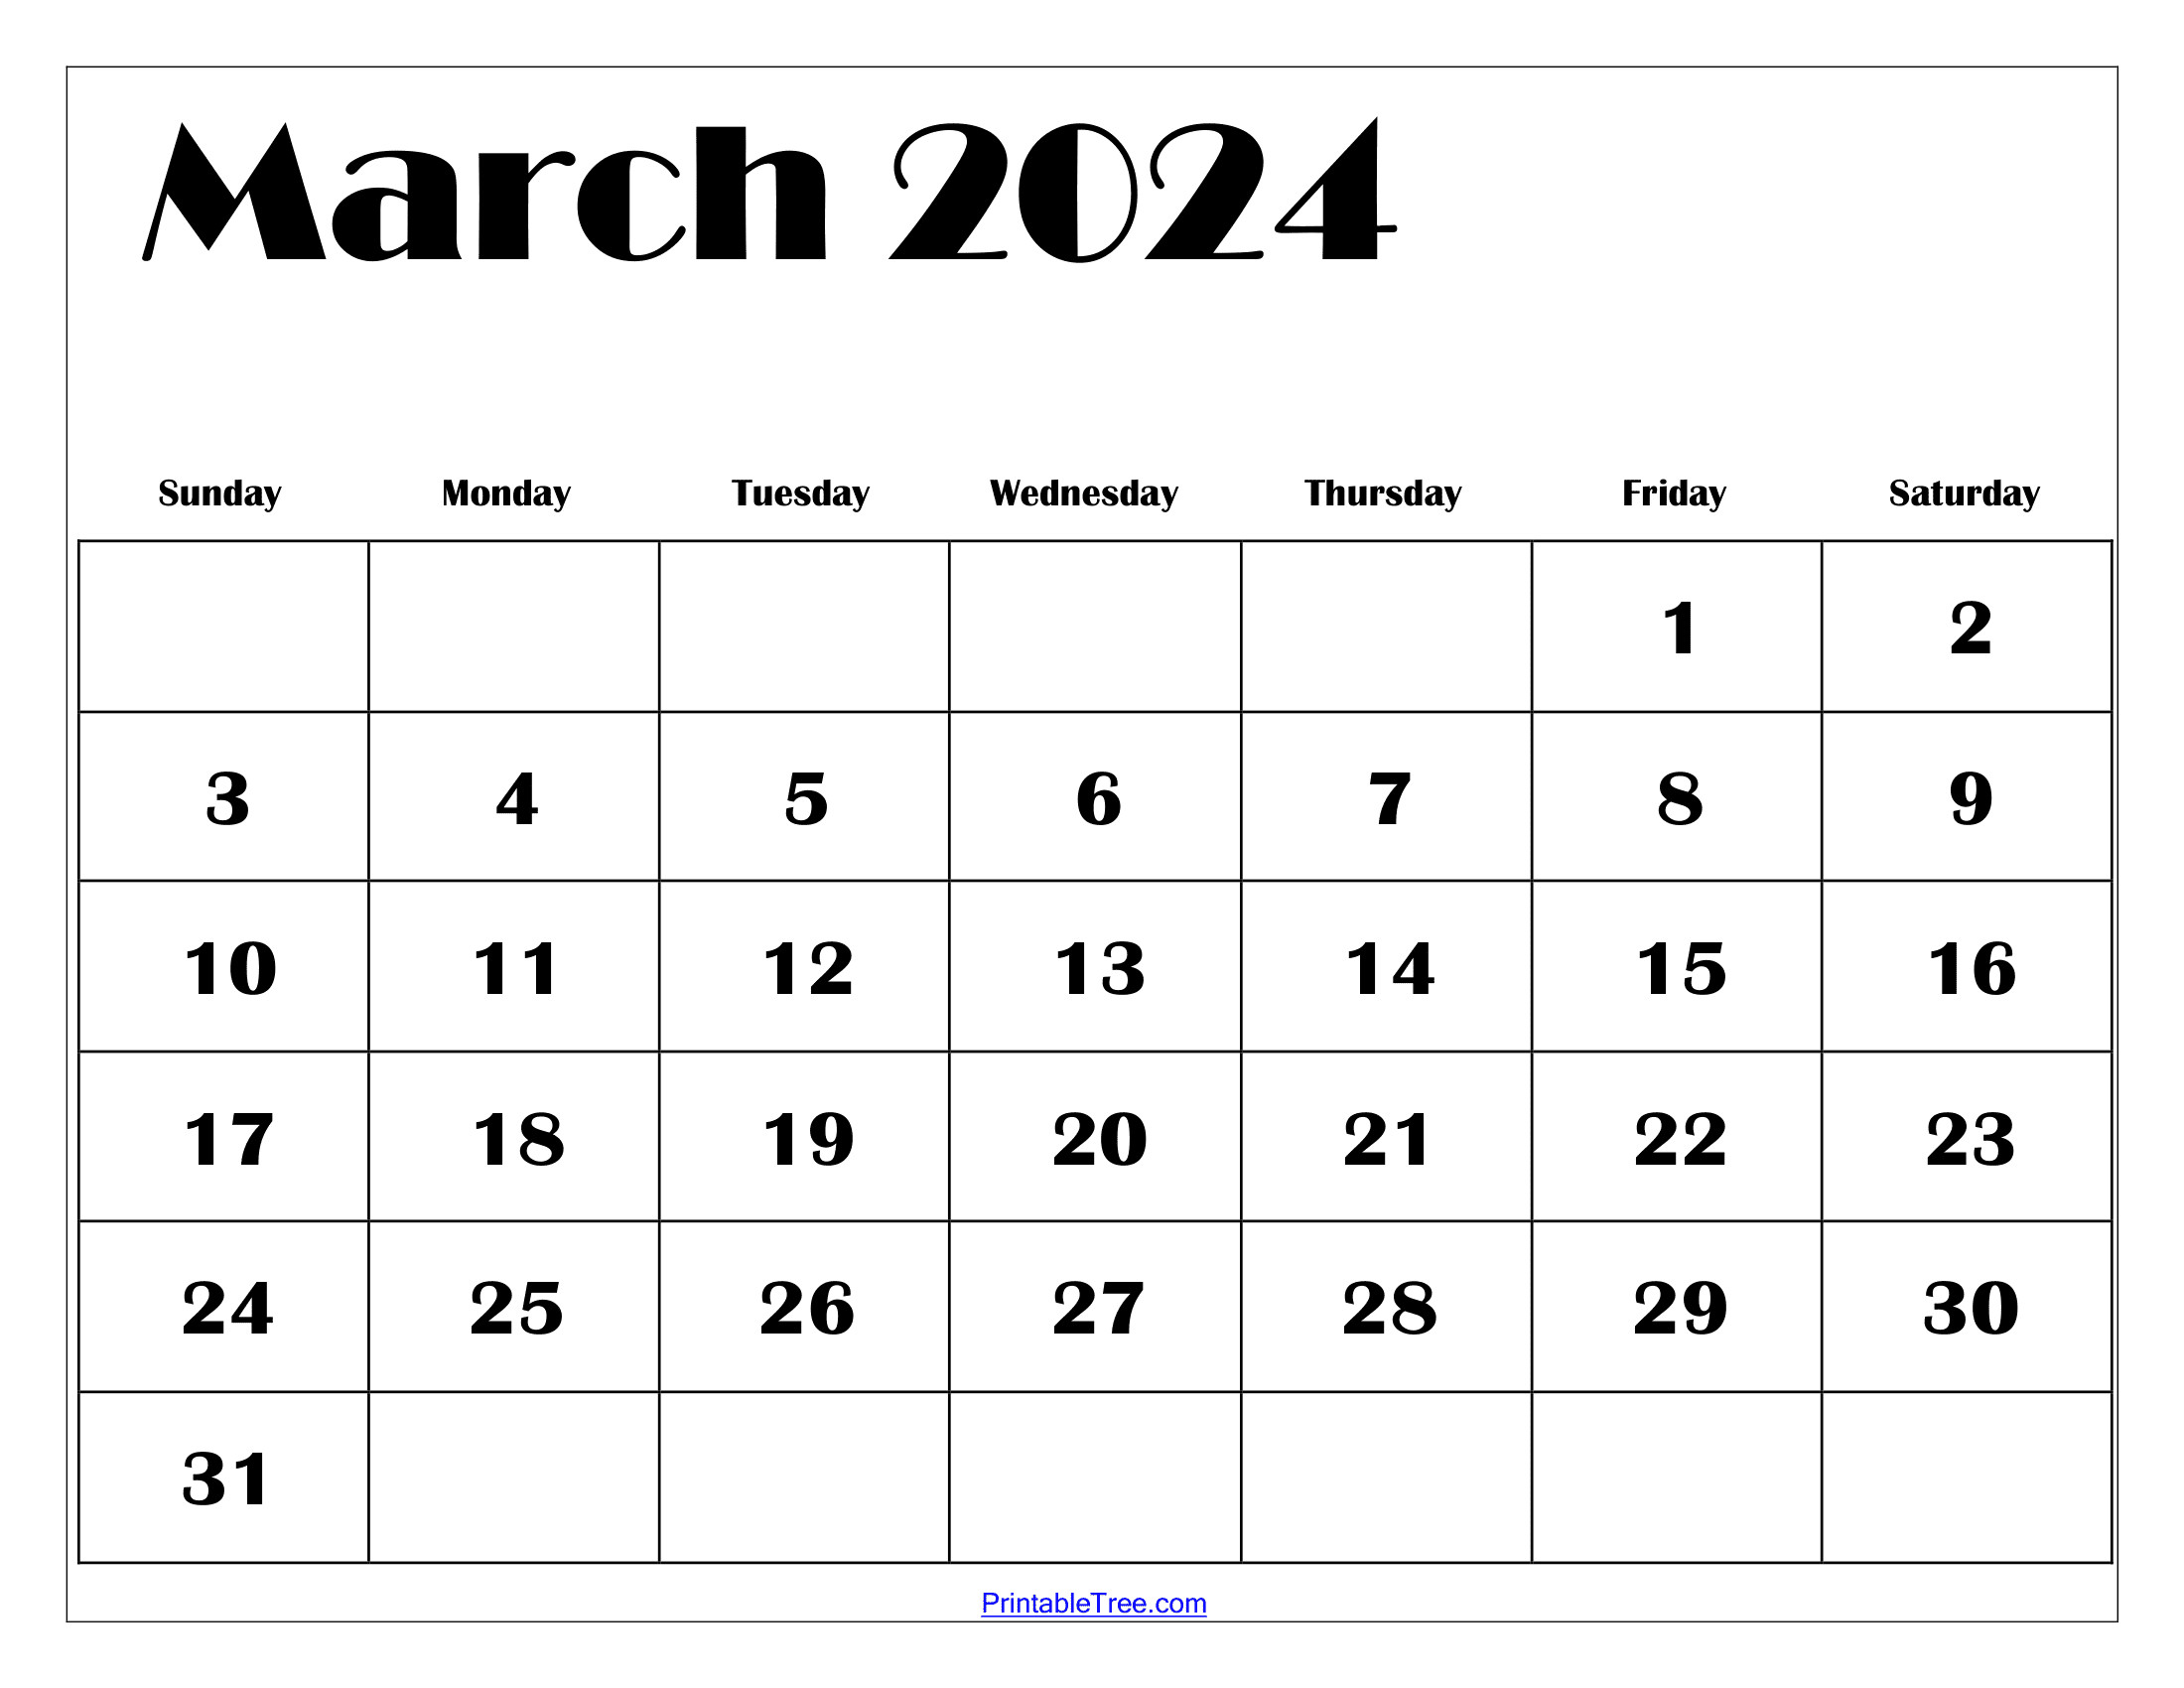 March 2024 Calendar Printable Pdf With Holidays Template Free for Free Printable March 2024 Calendar Page